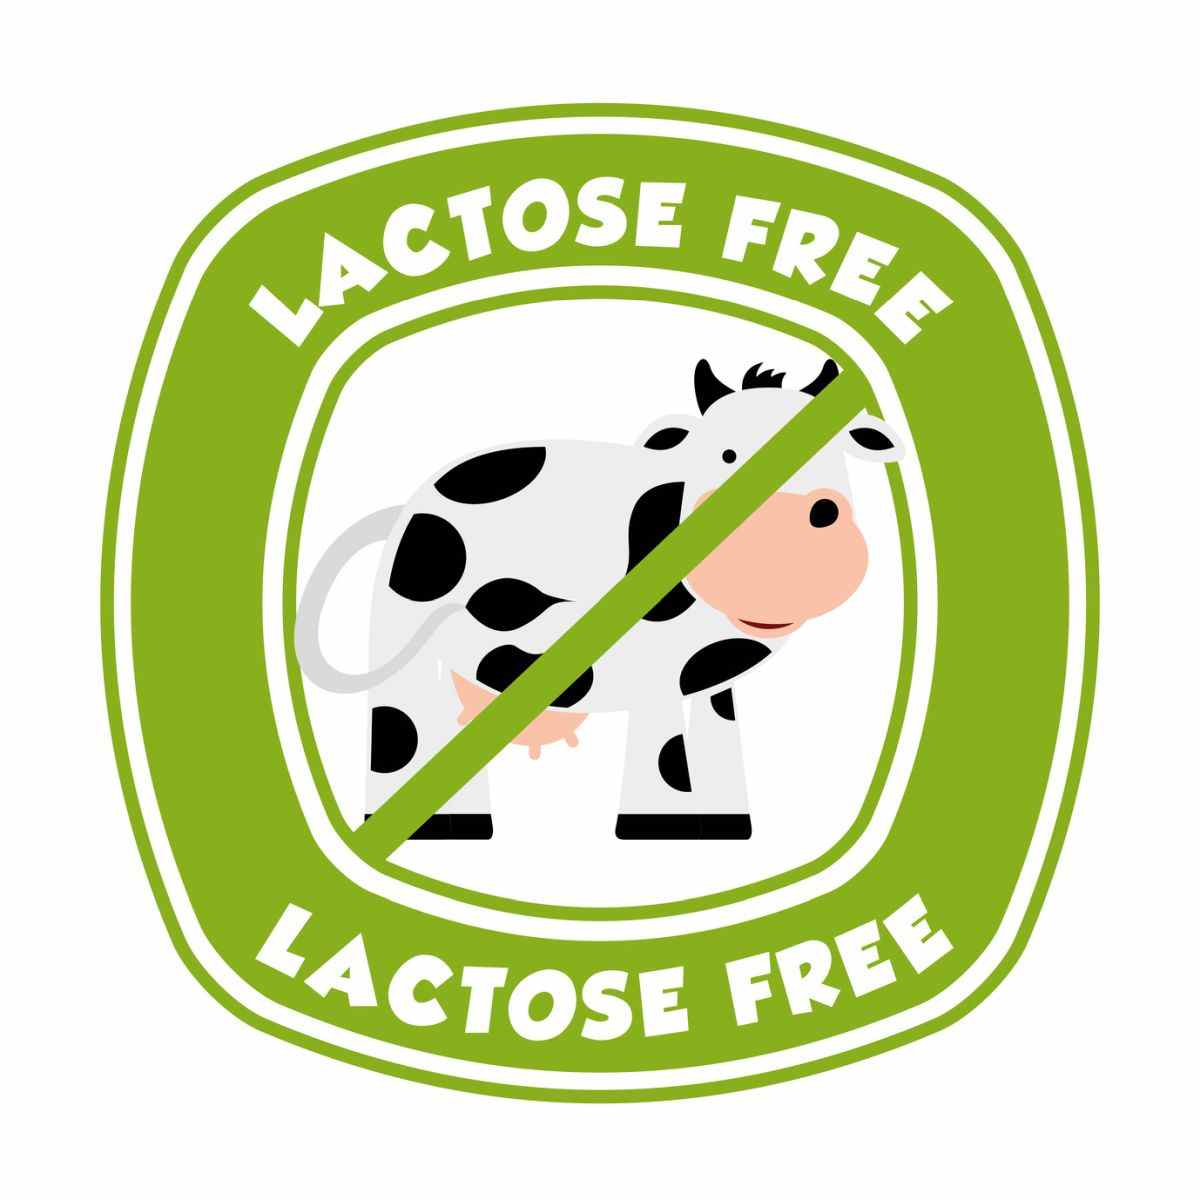 Lactose free | How To Debloat For Spring In Quick And Easy Ways